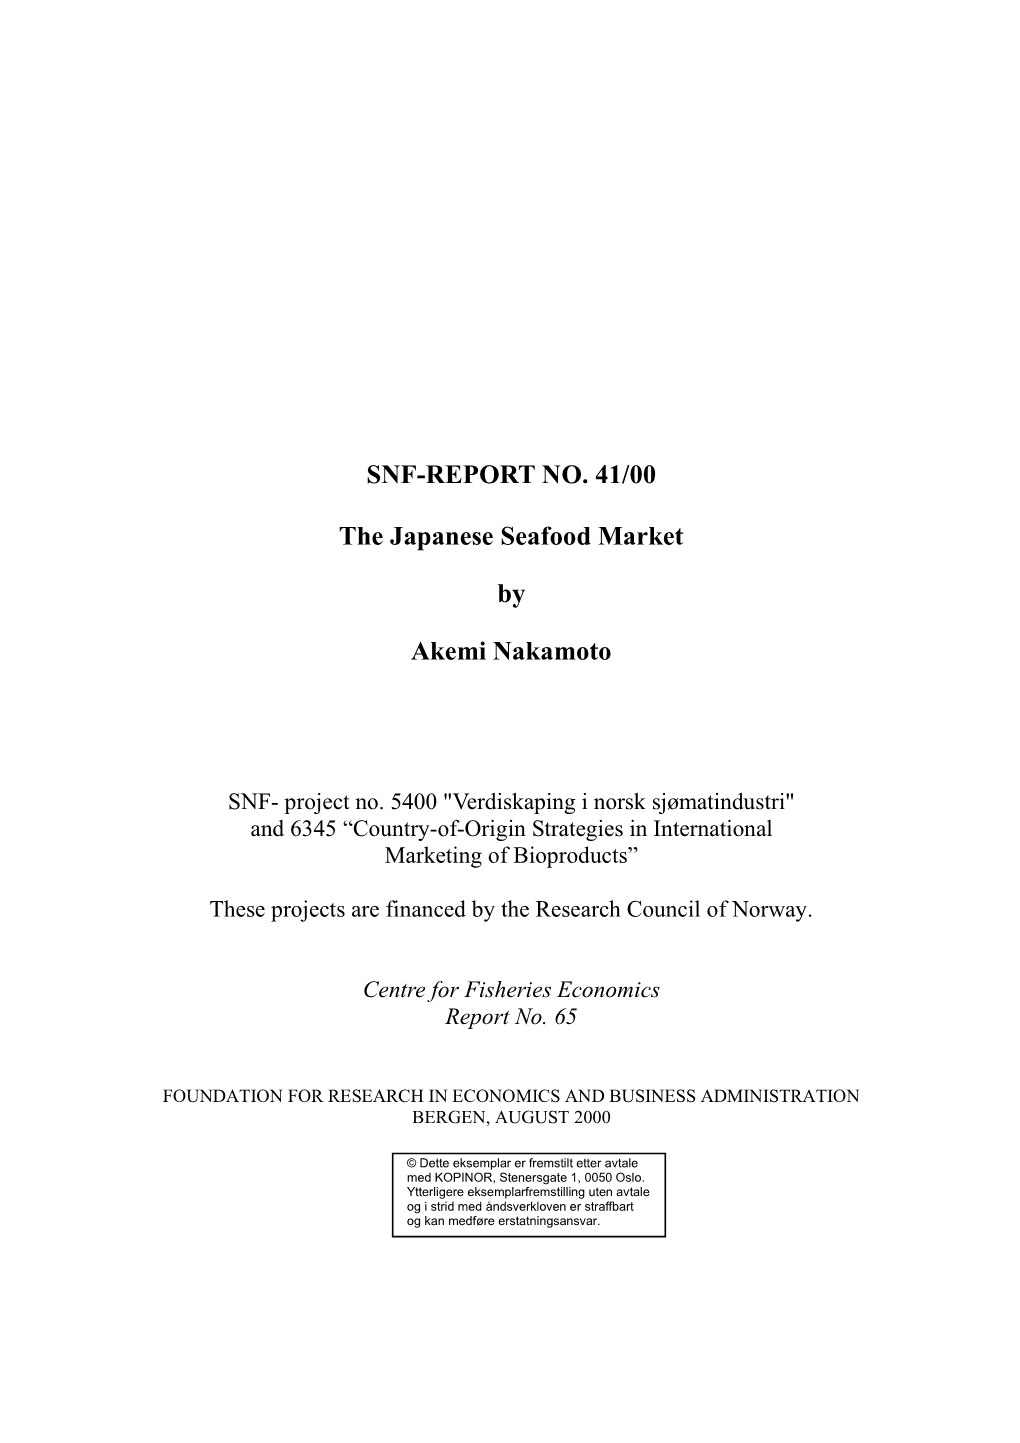 SNF-REPORT NO. 41/00 the Japanese Seafood Market By